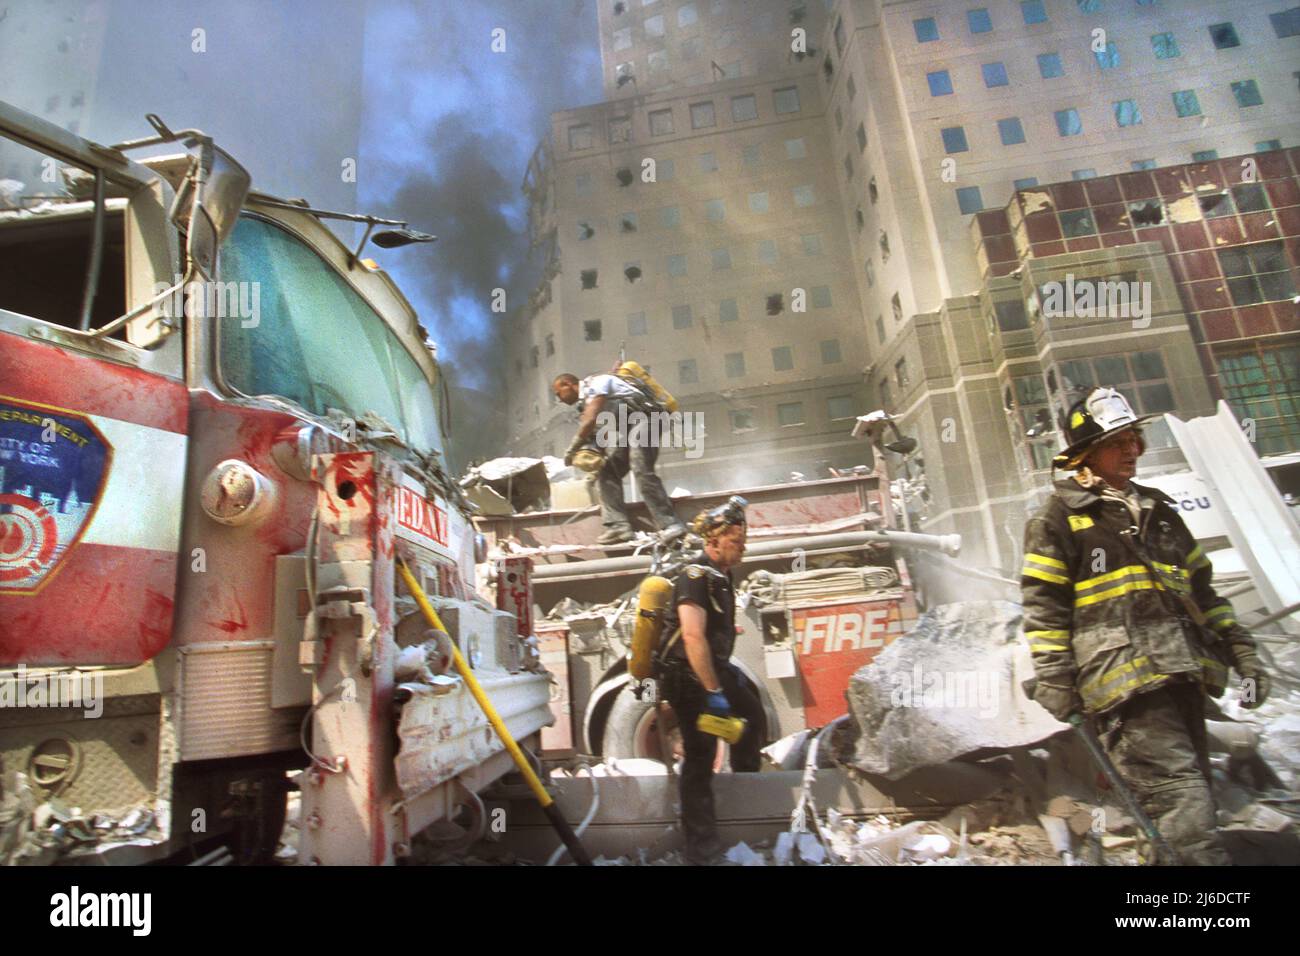 New York City fire fighters amid debris following September 11th terrorist attack on World Trade Center, New York City, New York, USA, Unidentified Artist Stock Photo